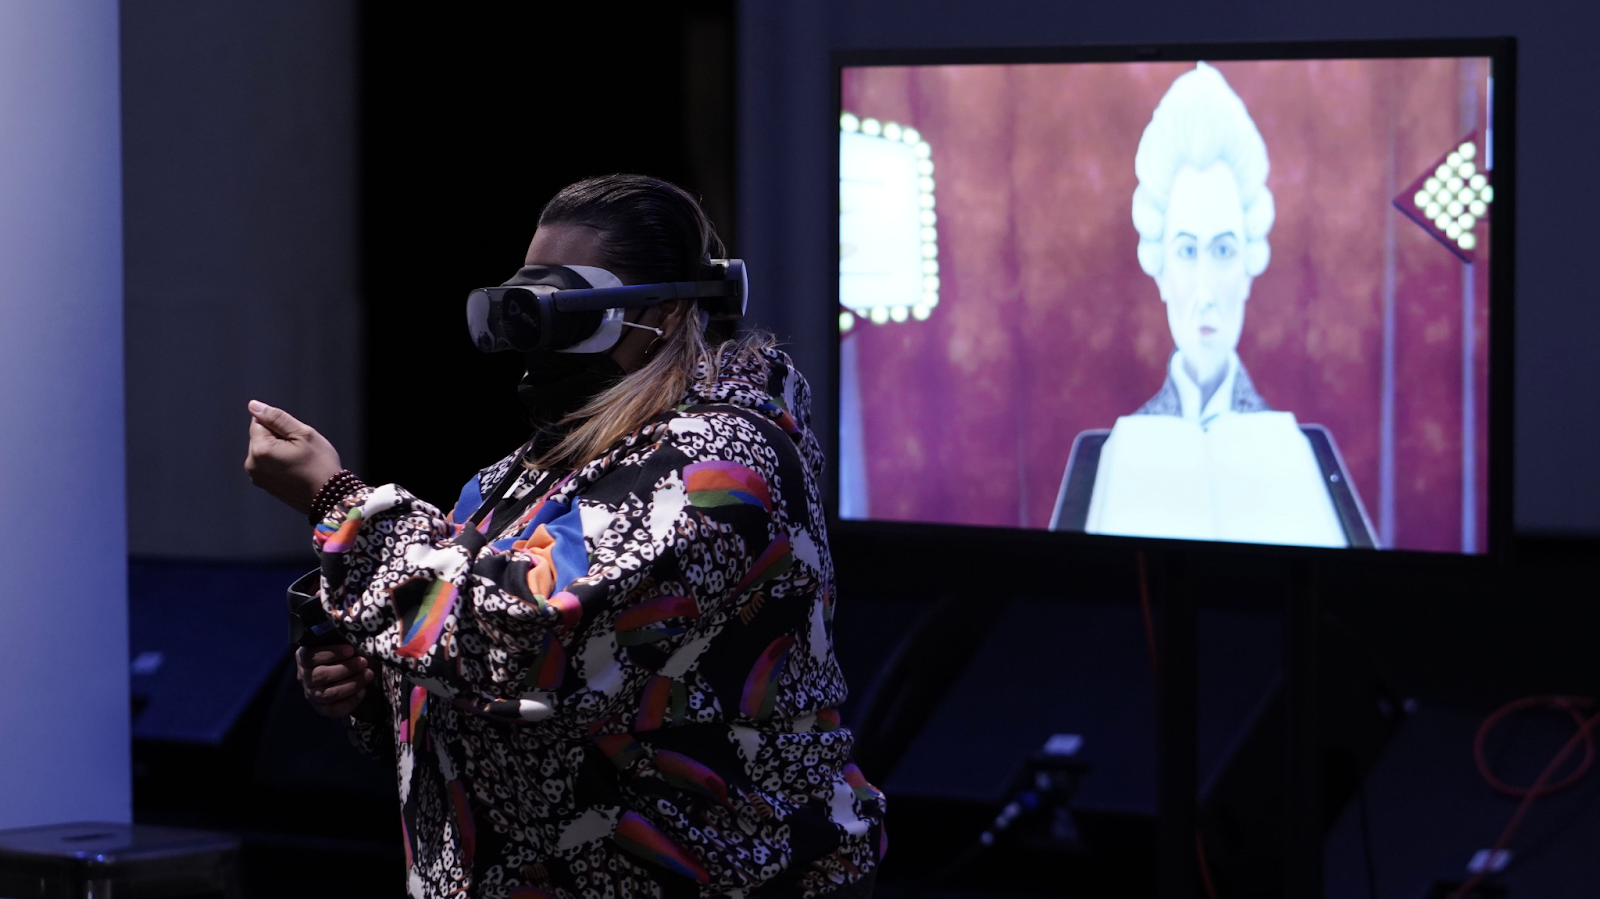 Graphic designer and disability justice advocate Jen White Johnson, an Afro-Latina woman in a colorful jacket wearing a VR headset, stands in front of a screen that shows her perspective in the virtual world of Maestro. The screen shows a white man in a wig standing behind a conductor’s lectern